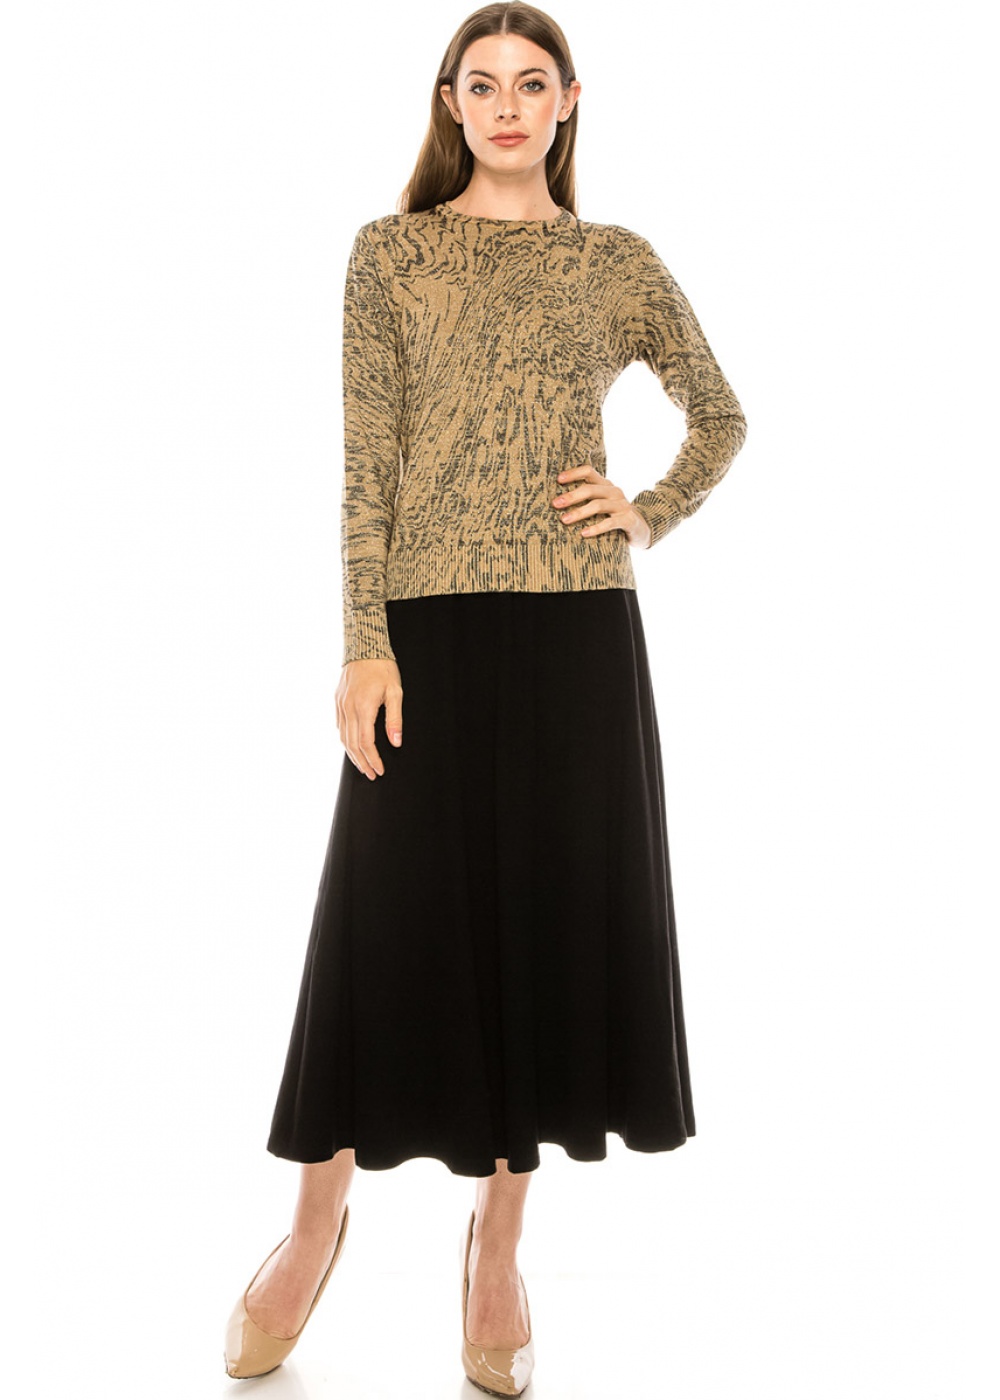 Gold lurex sweater with an abstract wavy pattern